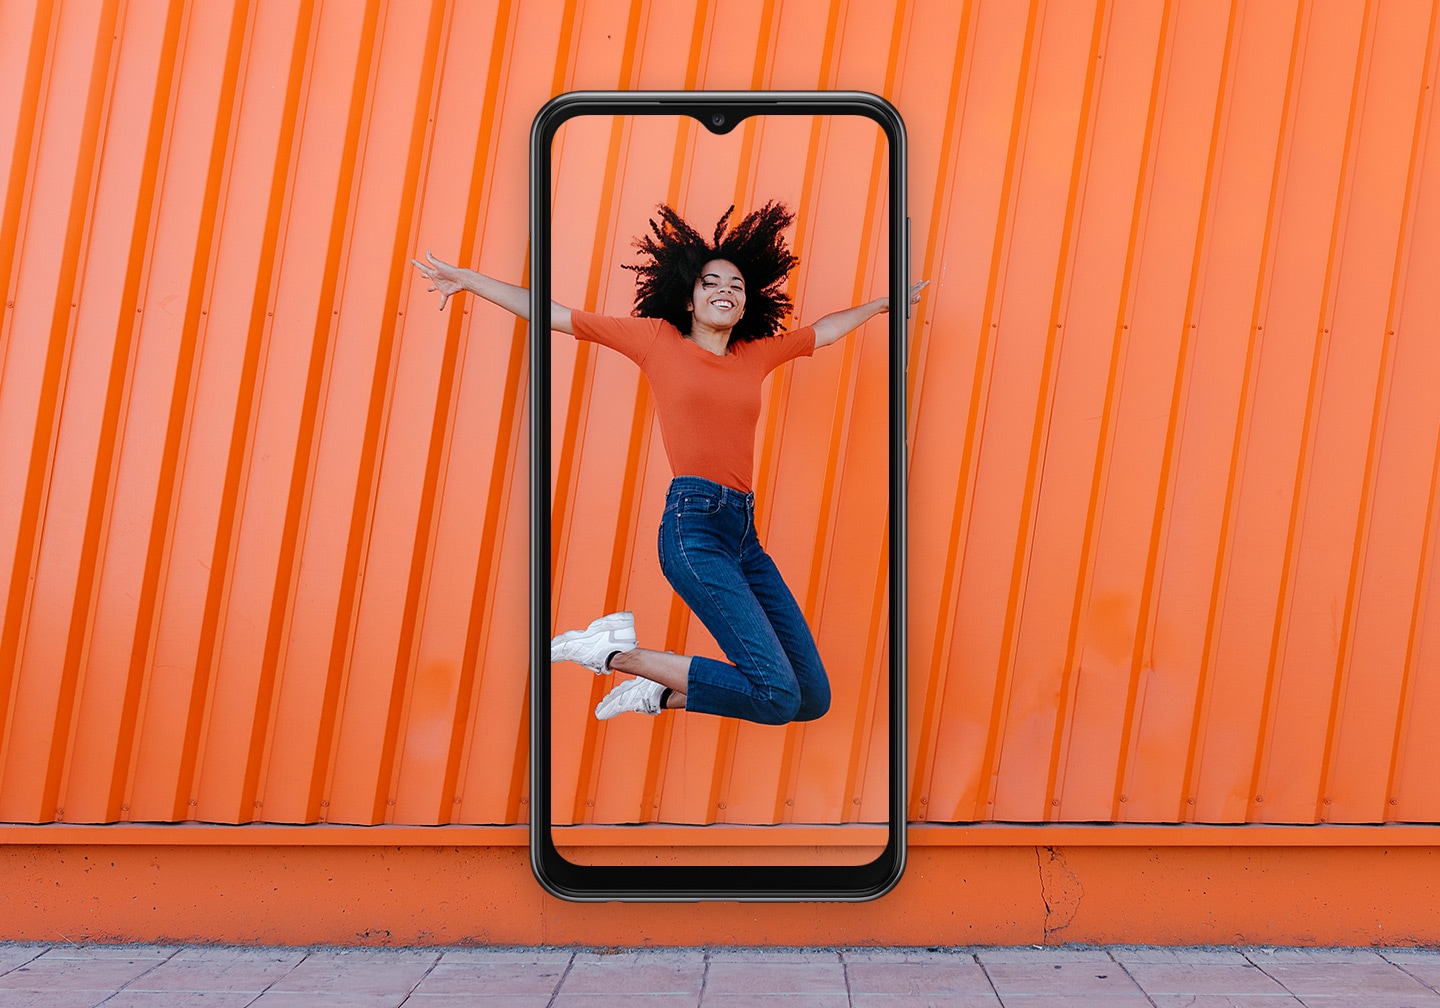 A woman, smiling, is in mid-jump in front of an orange wall background. At the center, a Galaxy A23 is overlapping and captures the woman inside the screen.